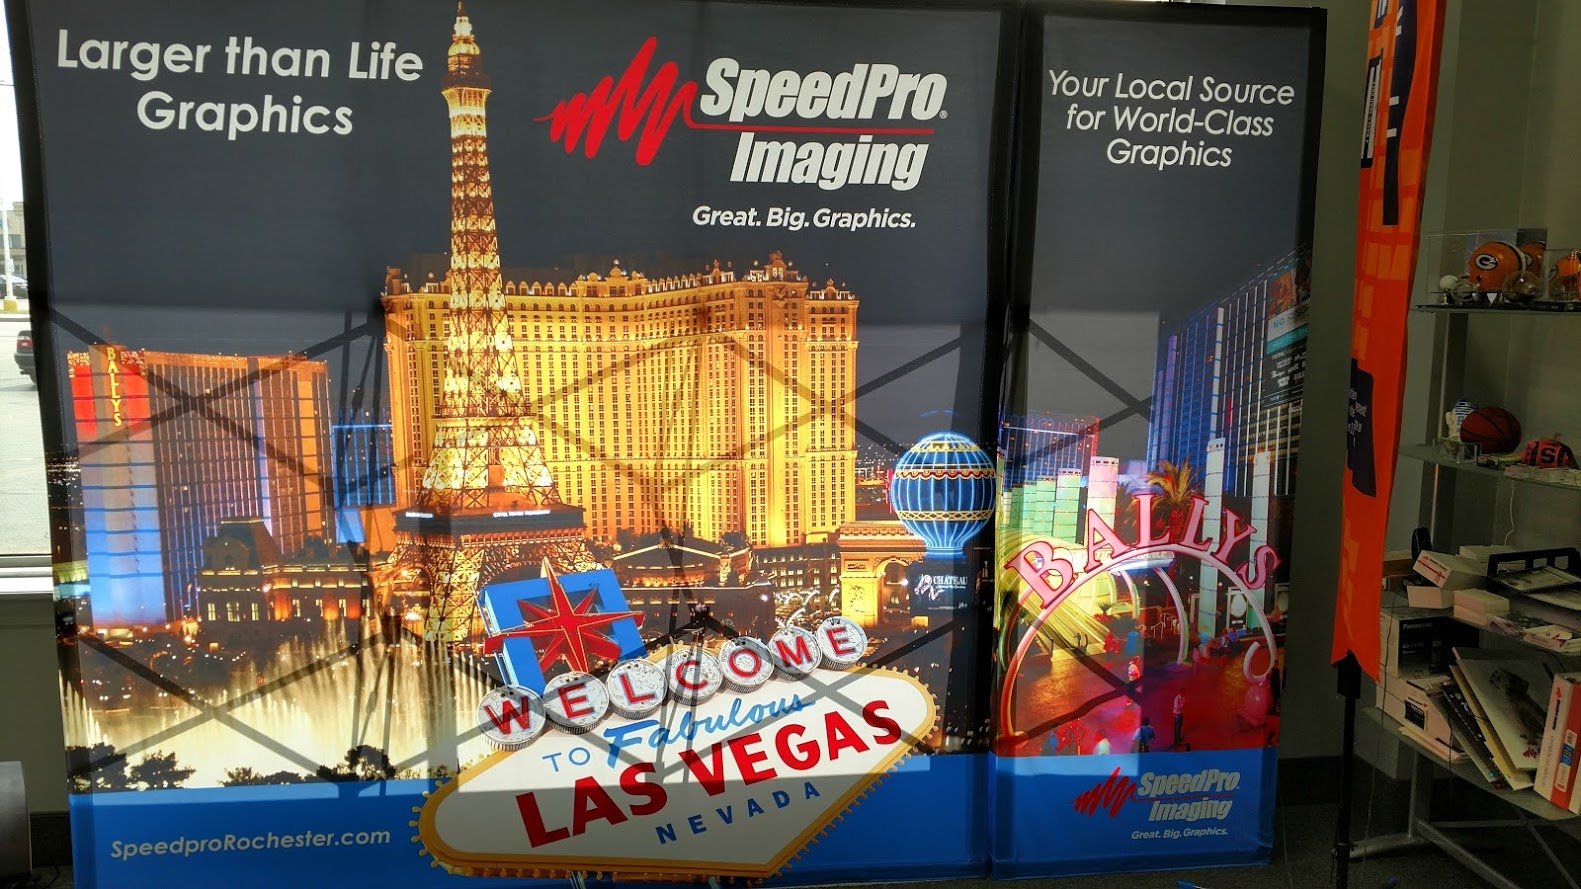 Speedpro imaging trade show display with las vegas background and welcome to las vegas sign